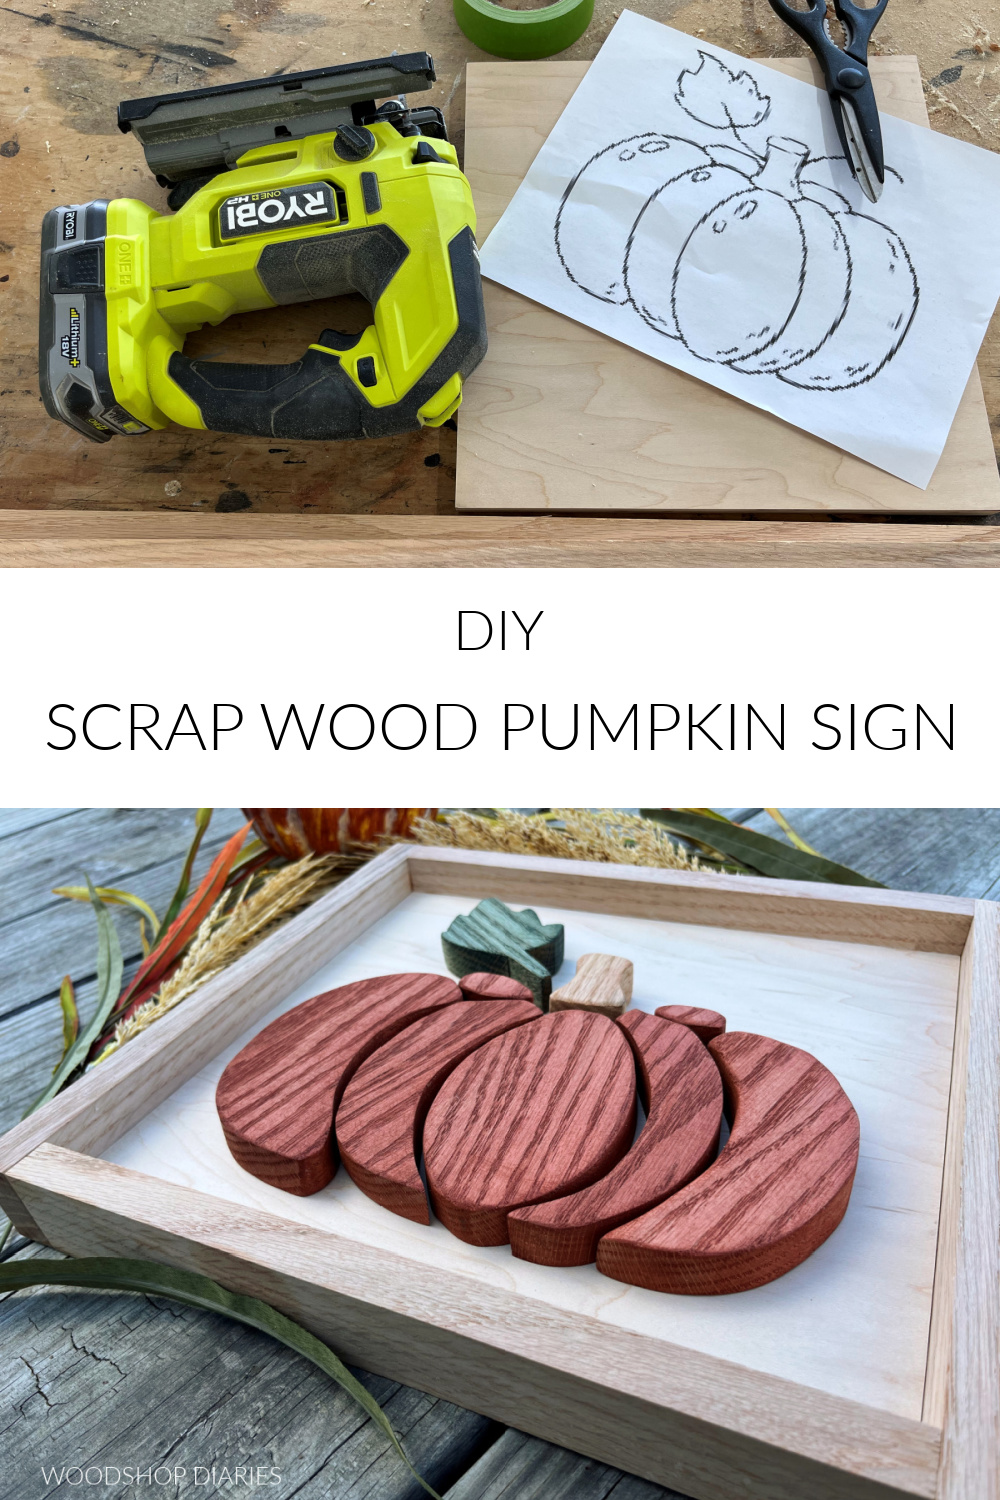 Pinterest collage image showing tools and materials at top and completed scrap wood pumpkin sign at bottom with text "DIY SCRAP WOOD PUMPKIN SIGN"